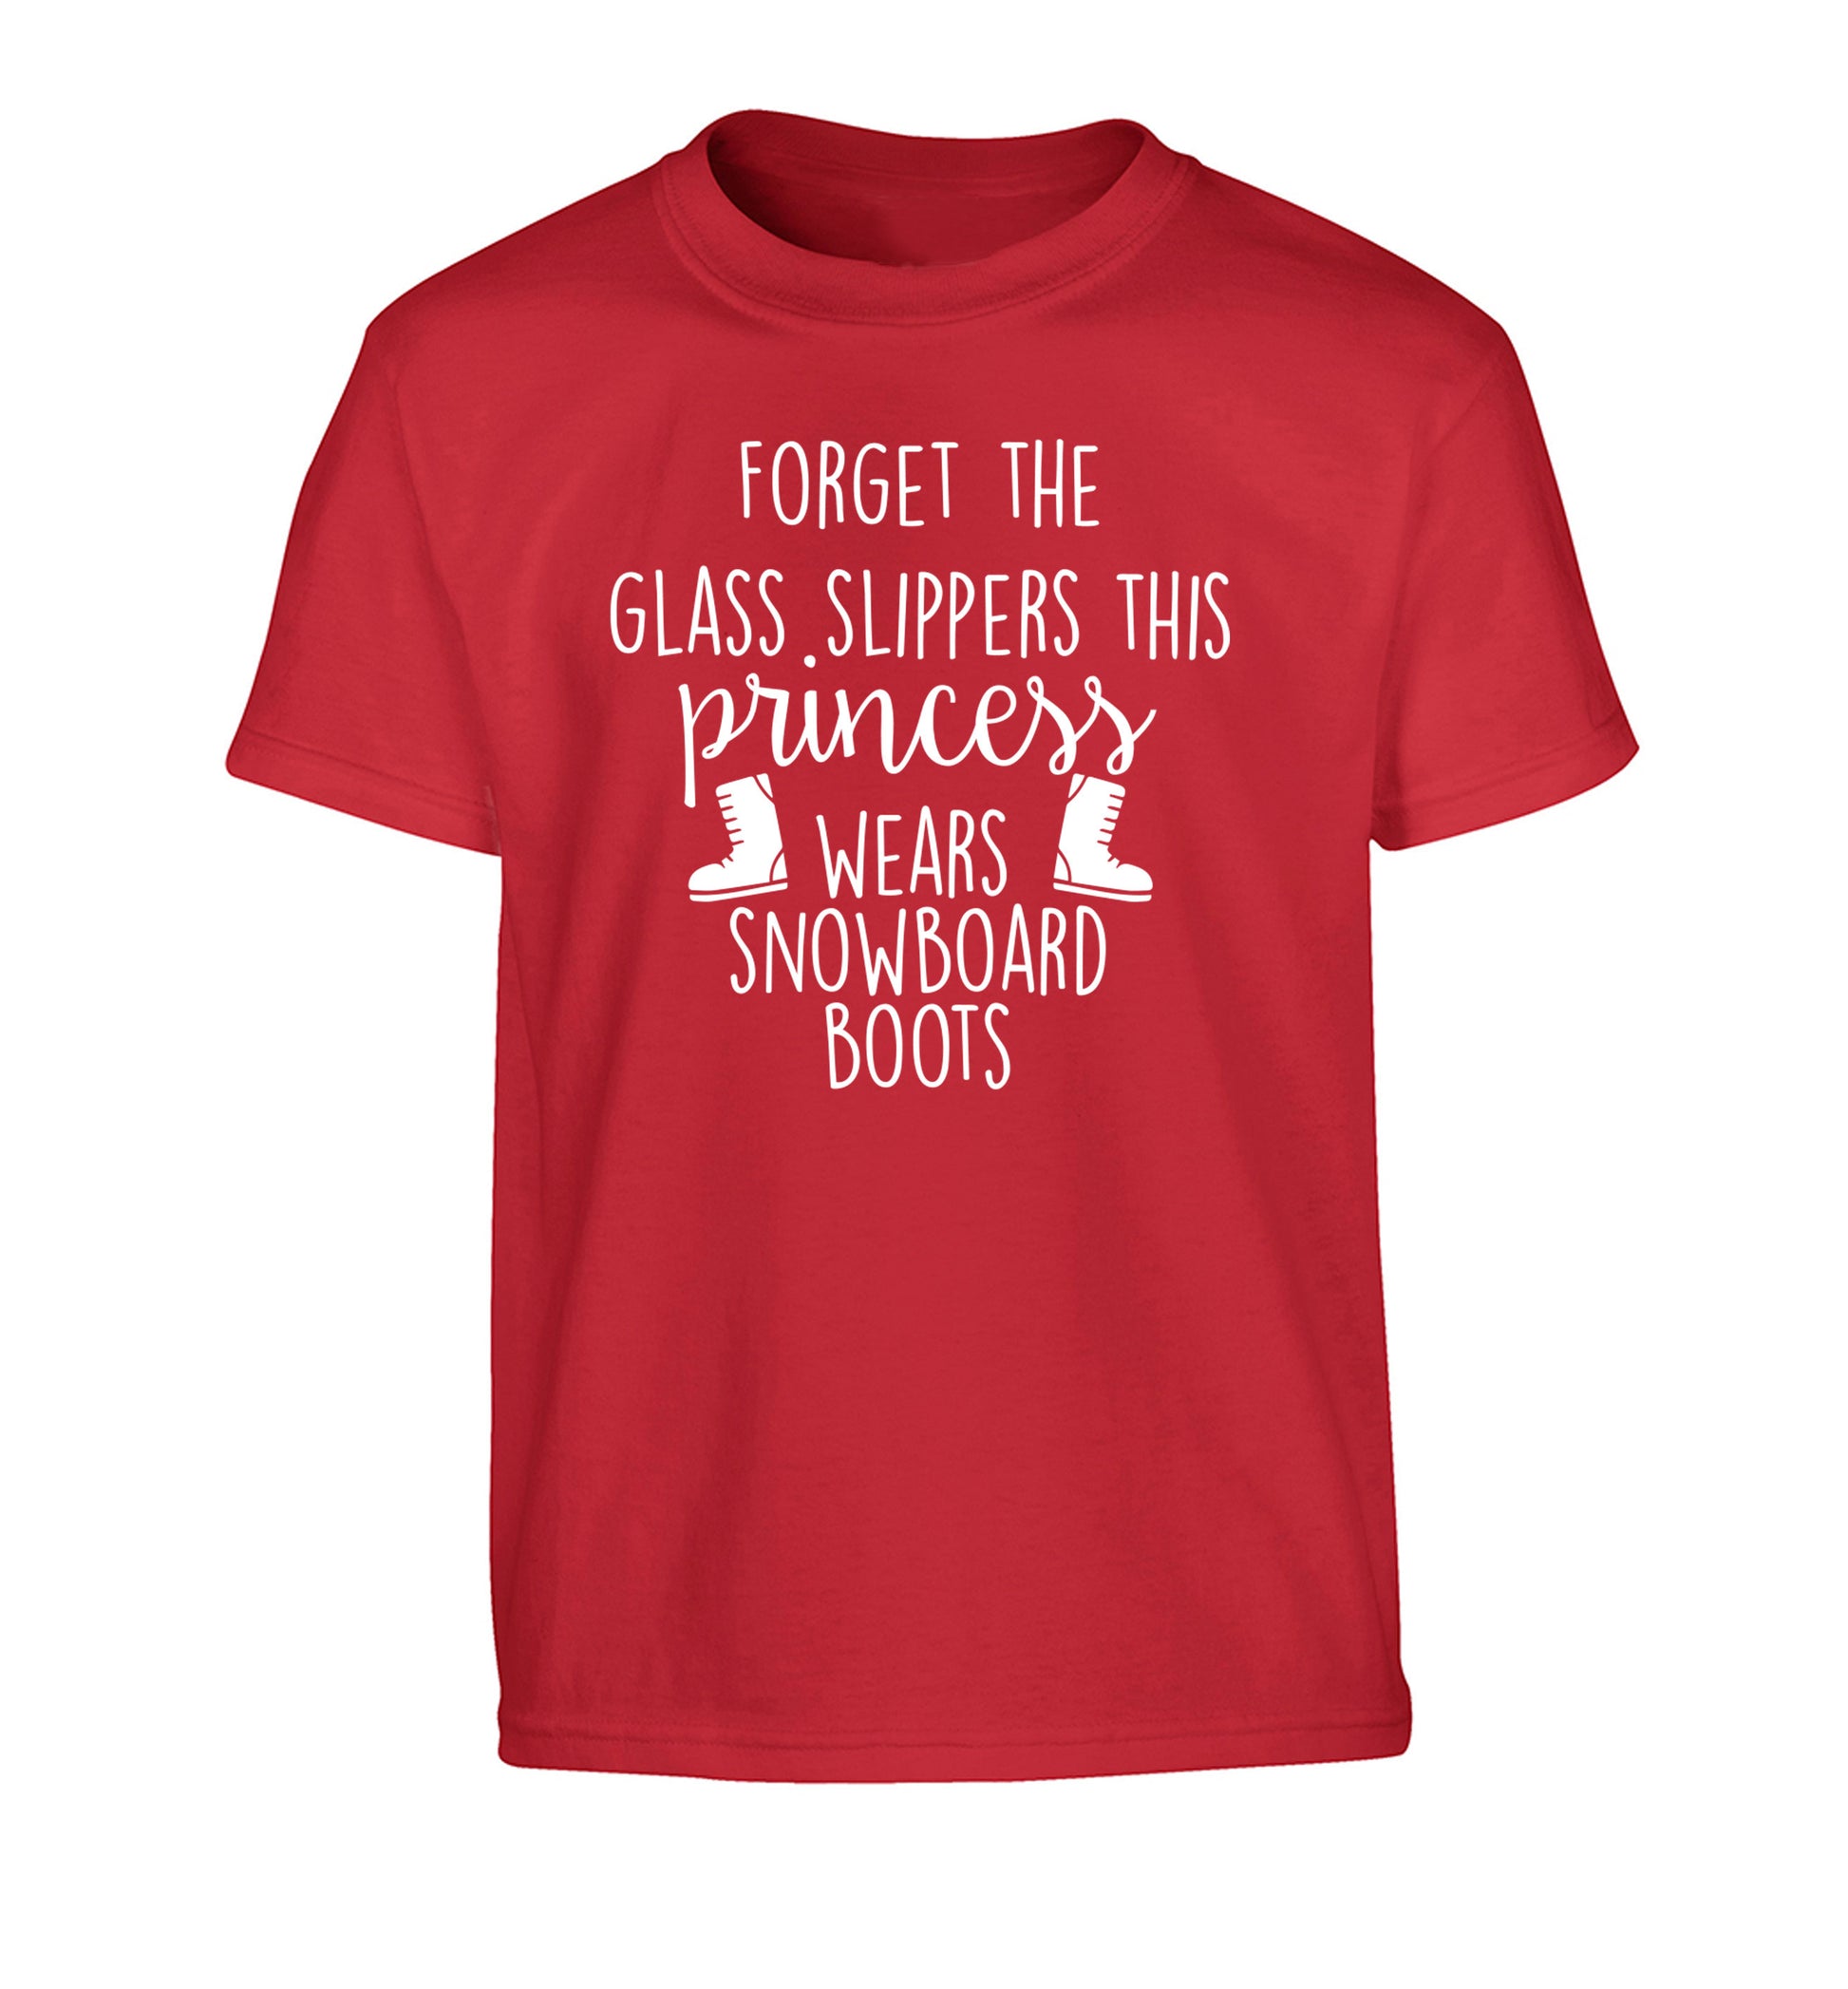 Forget the glass slippers this princess wears snowboard boots Children's red Tshirt 12-14 Years